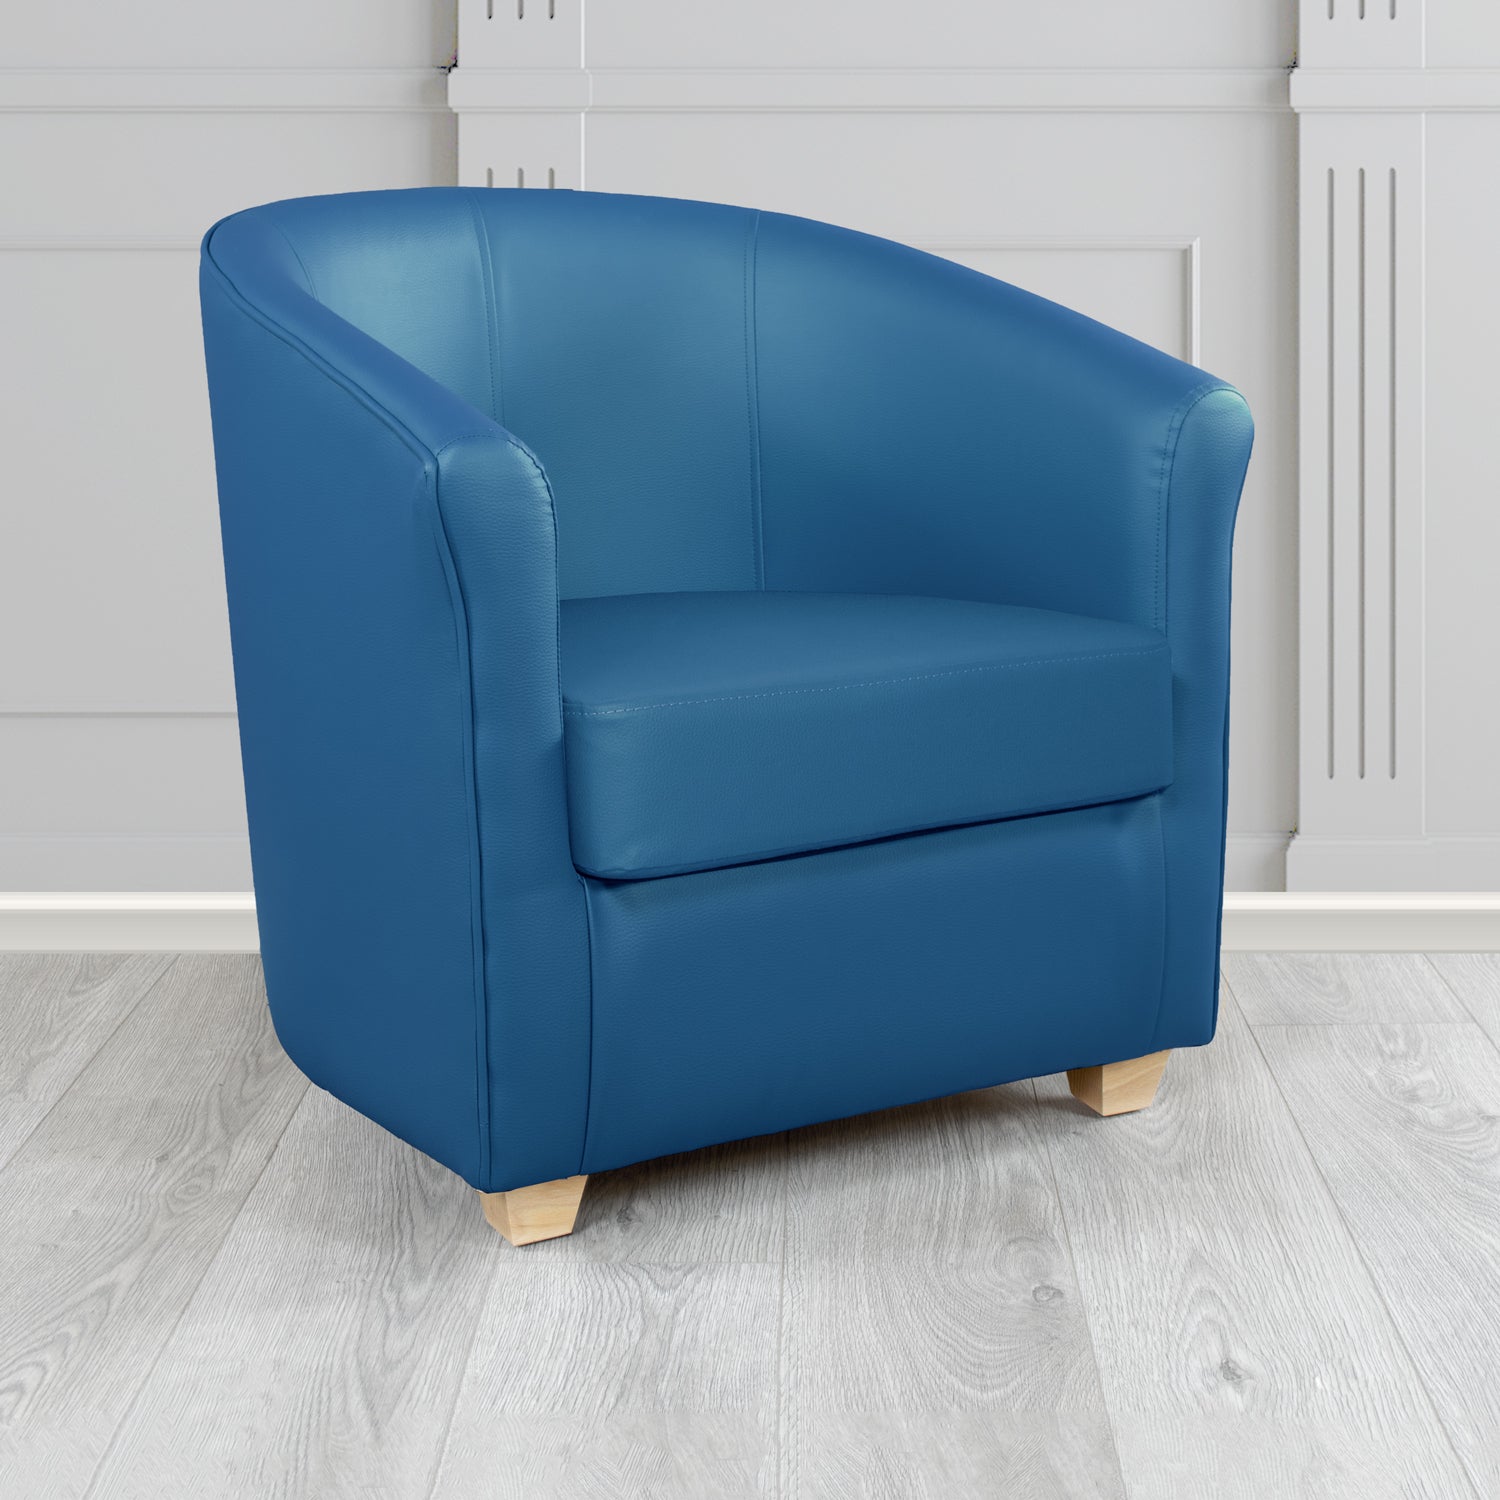 Cannes Tub Chair in Madrid Royal Faux Leather - The Tub Chair Shop